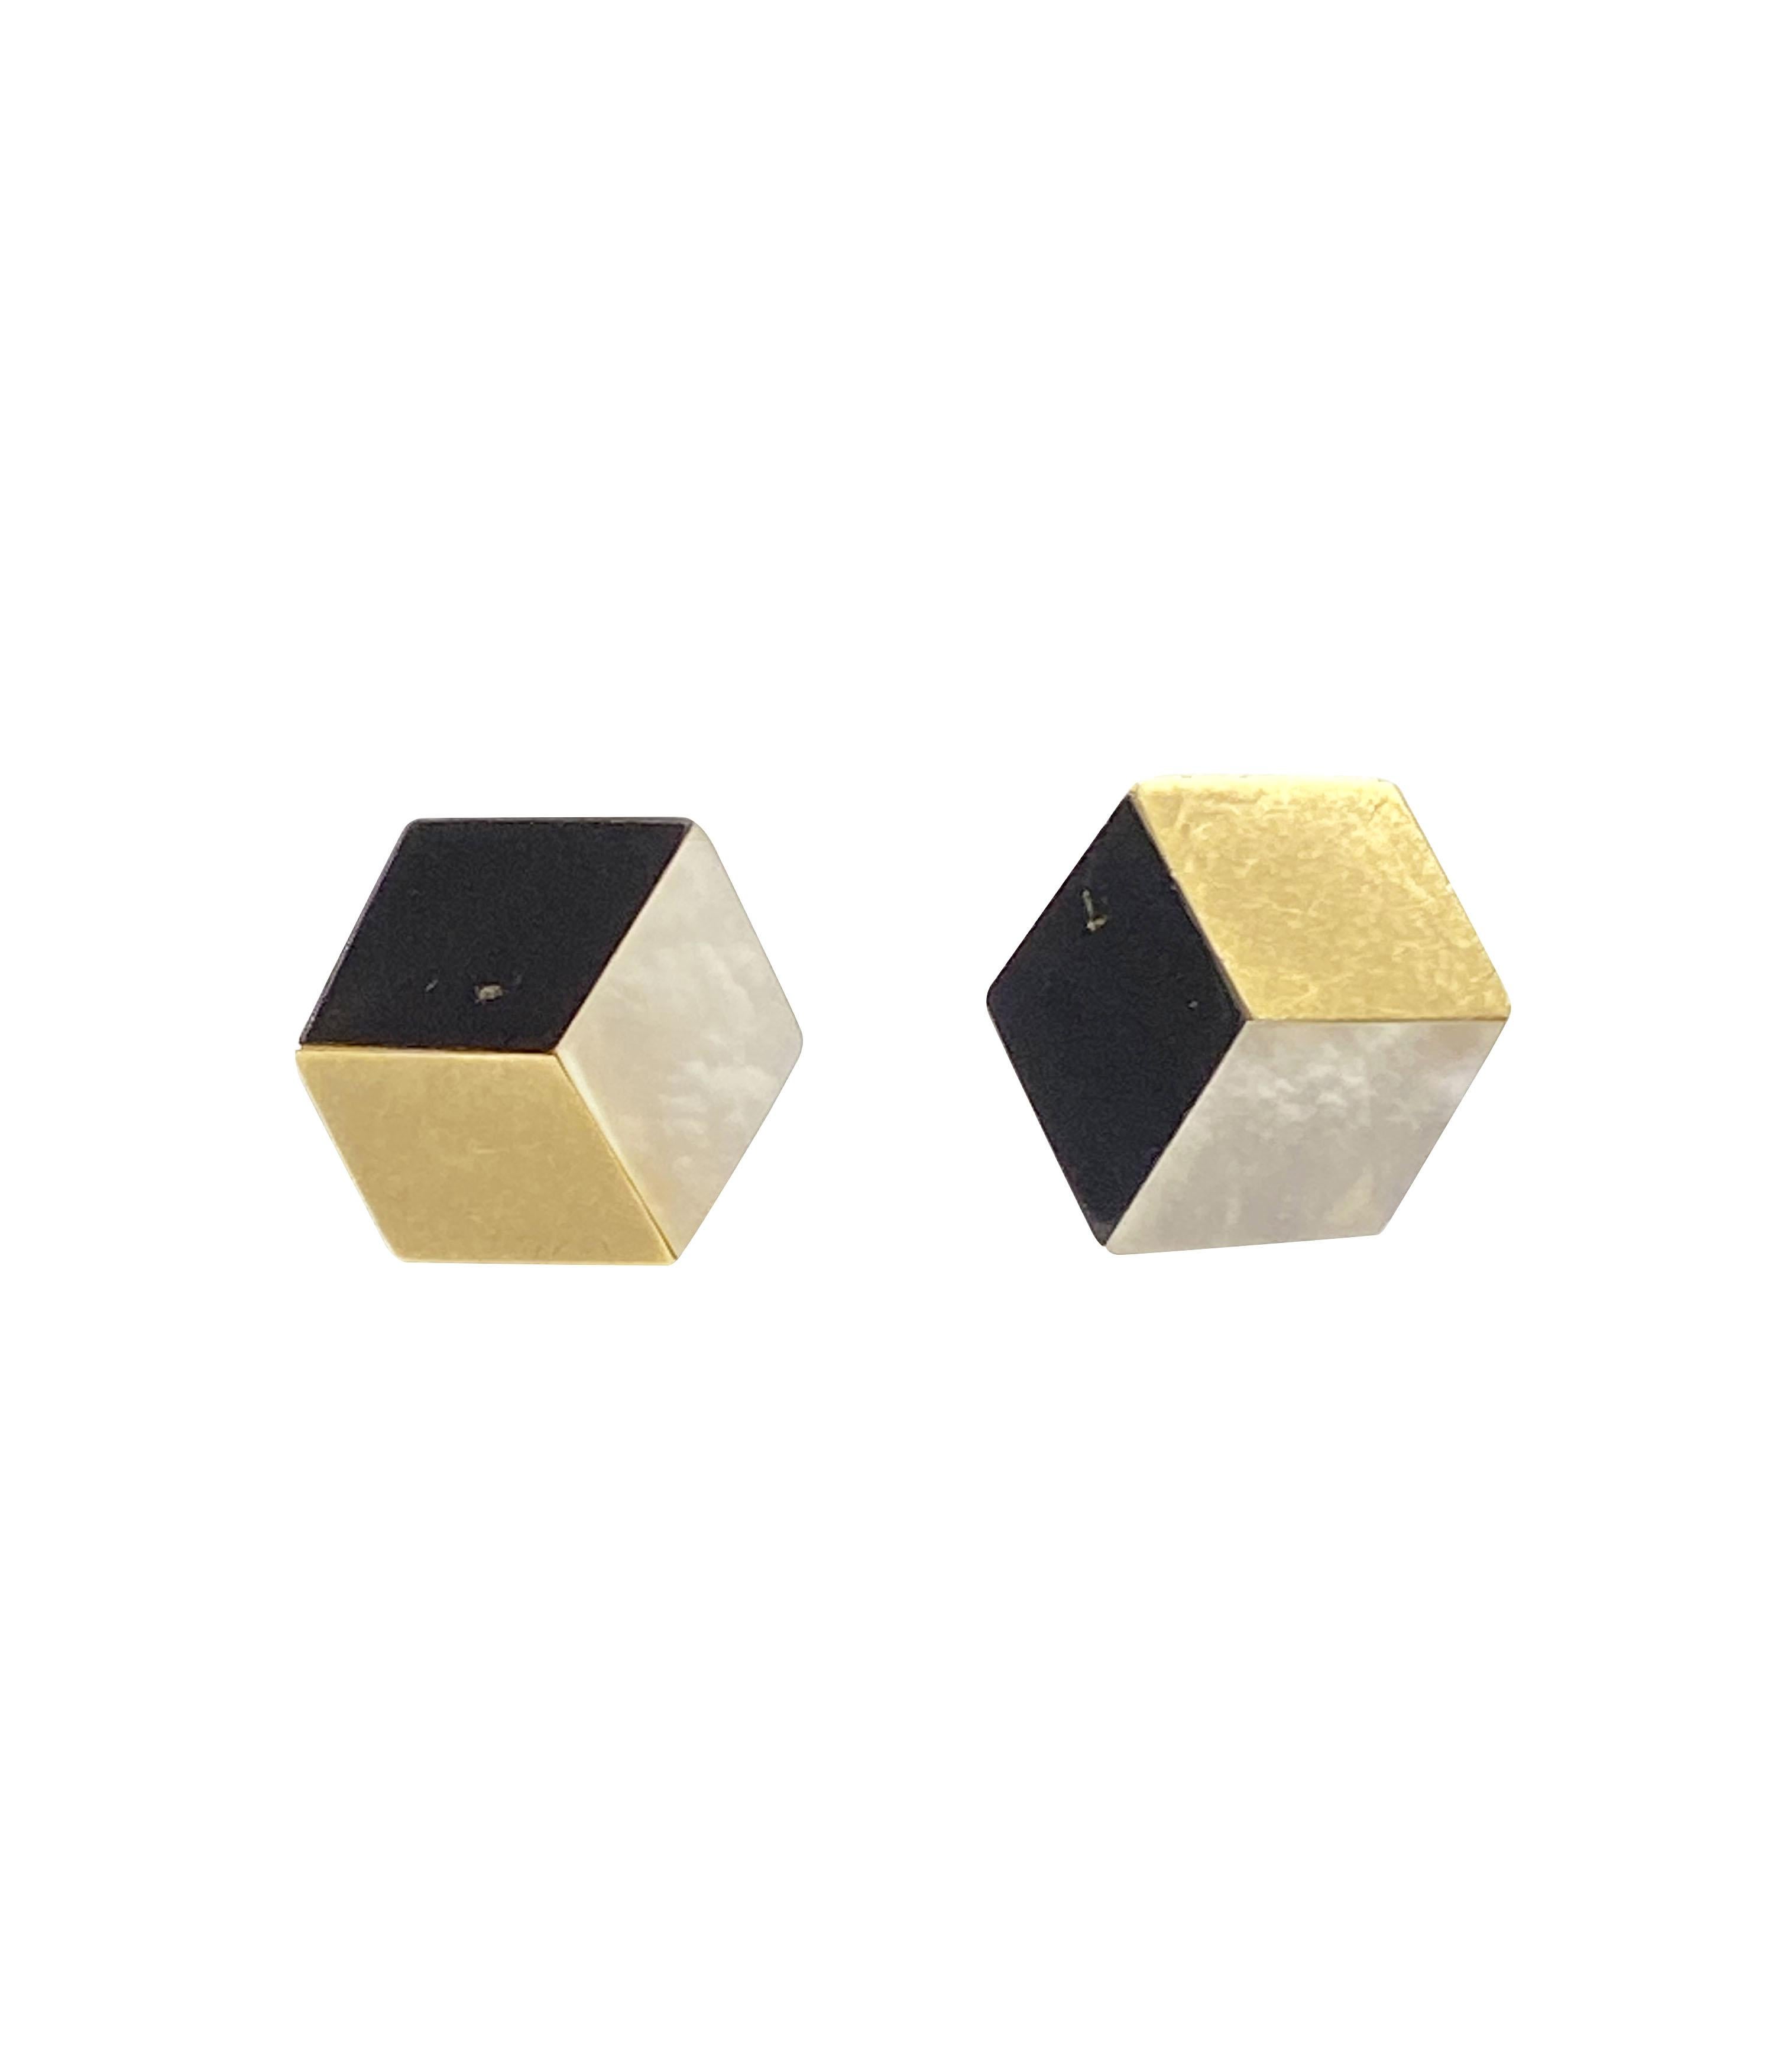 Circa 1980 Tiffany & Company 18K Yellow Gold Earrings, measuring 7/16 inch square the 3 sided earrings are designed in an illusion style giving them a dimensional effect. Set with Onyx and Mother of Pearl. Post backs. 